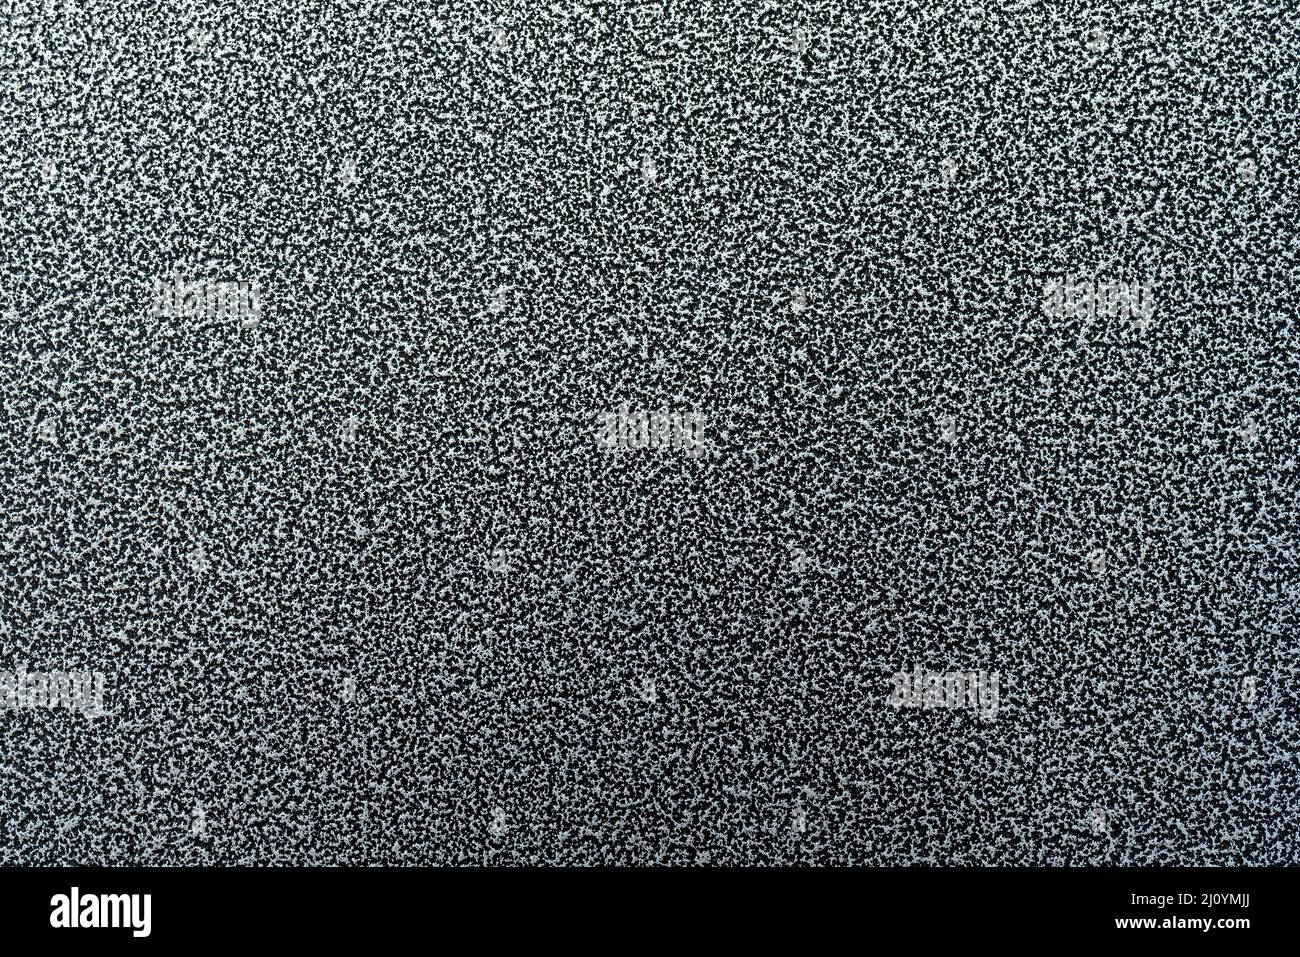 Etched dark metal texture. Abstract black background. Stock Photo